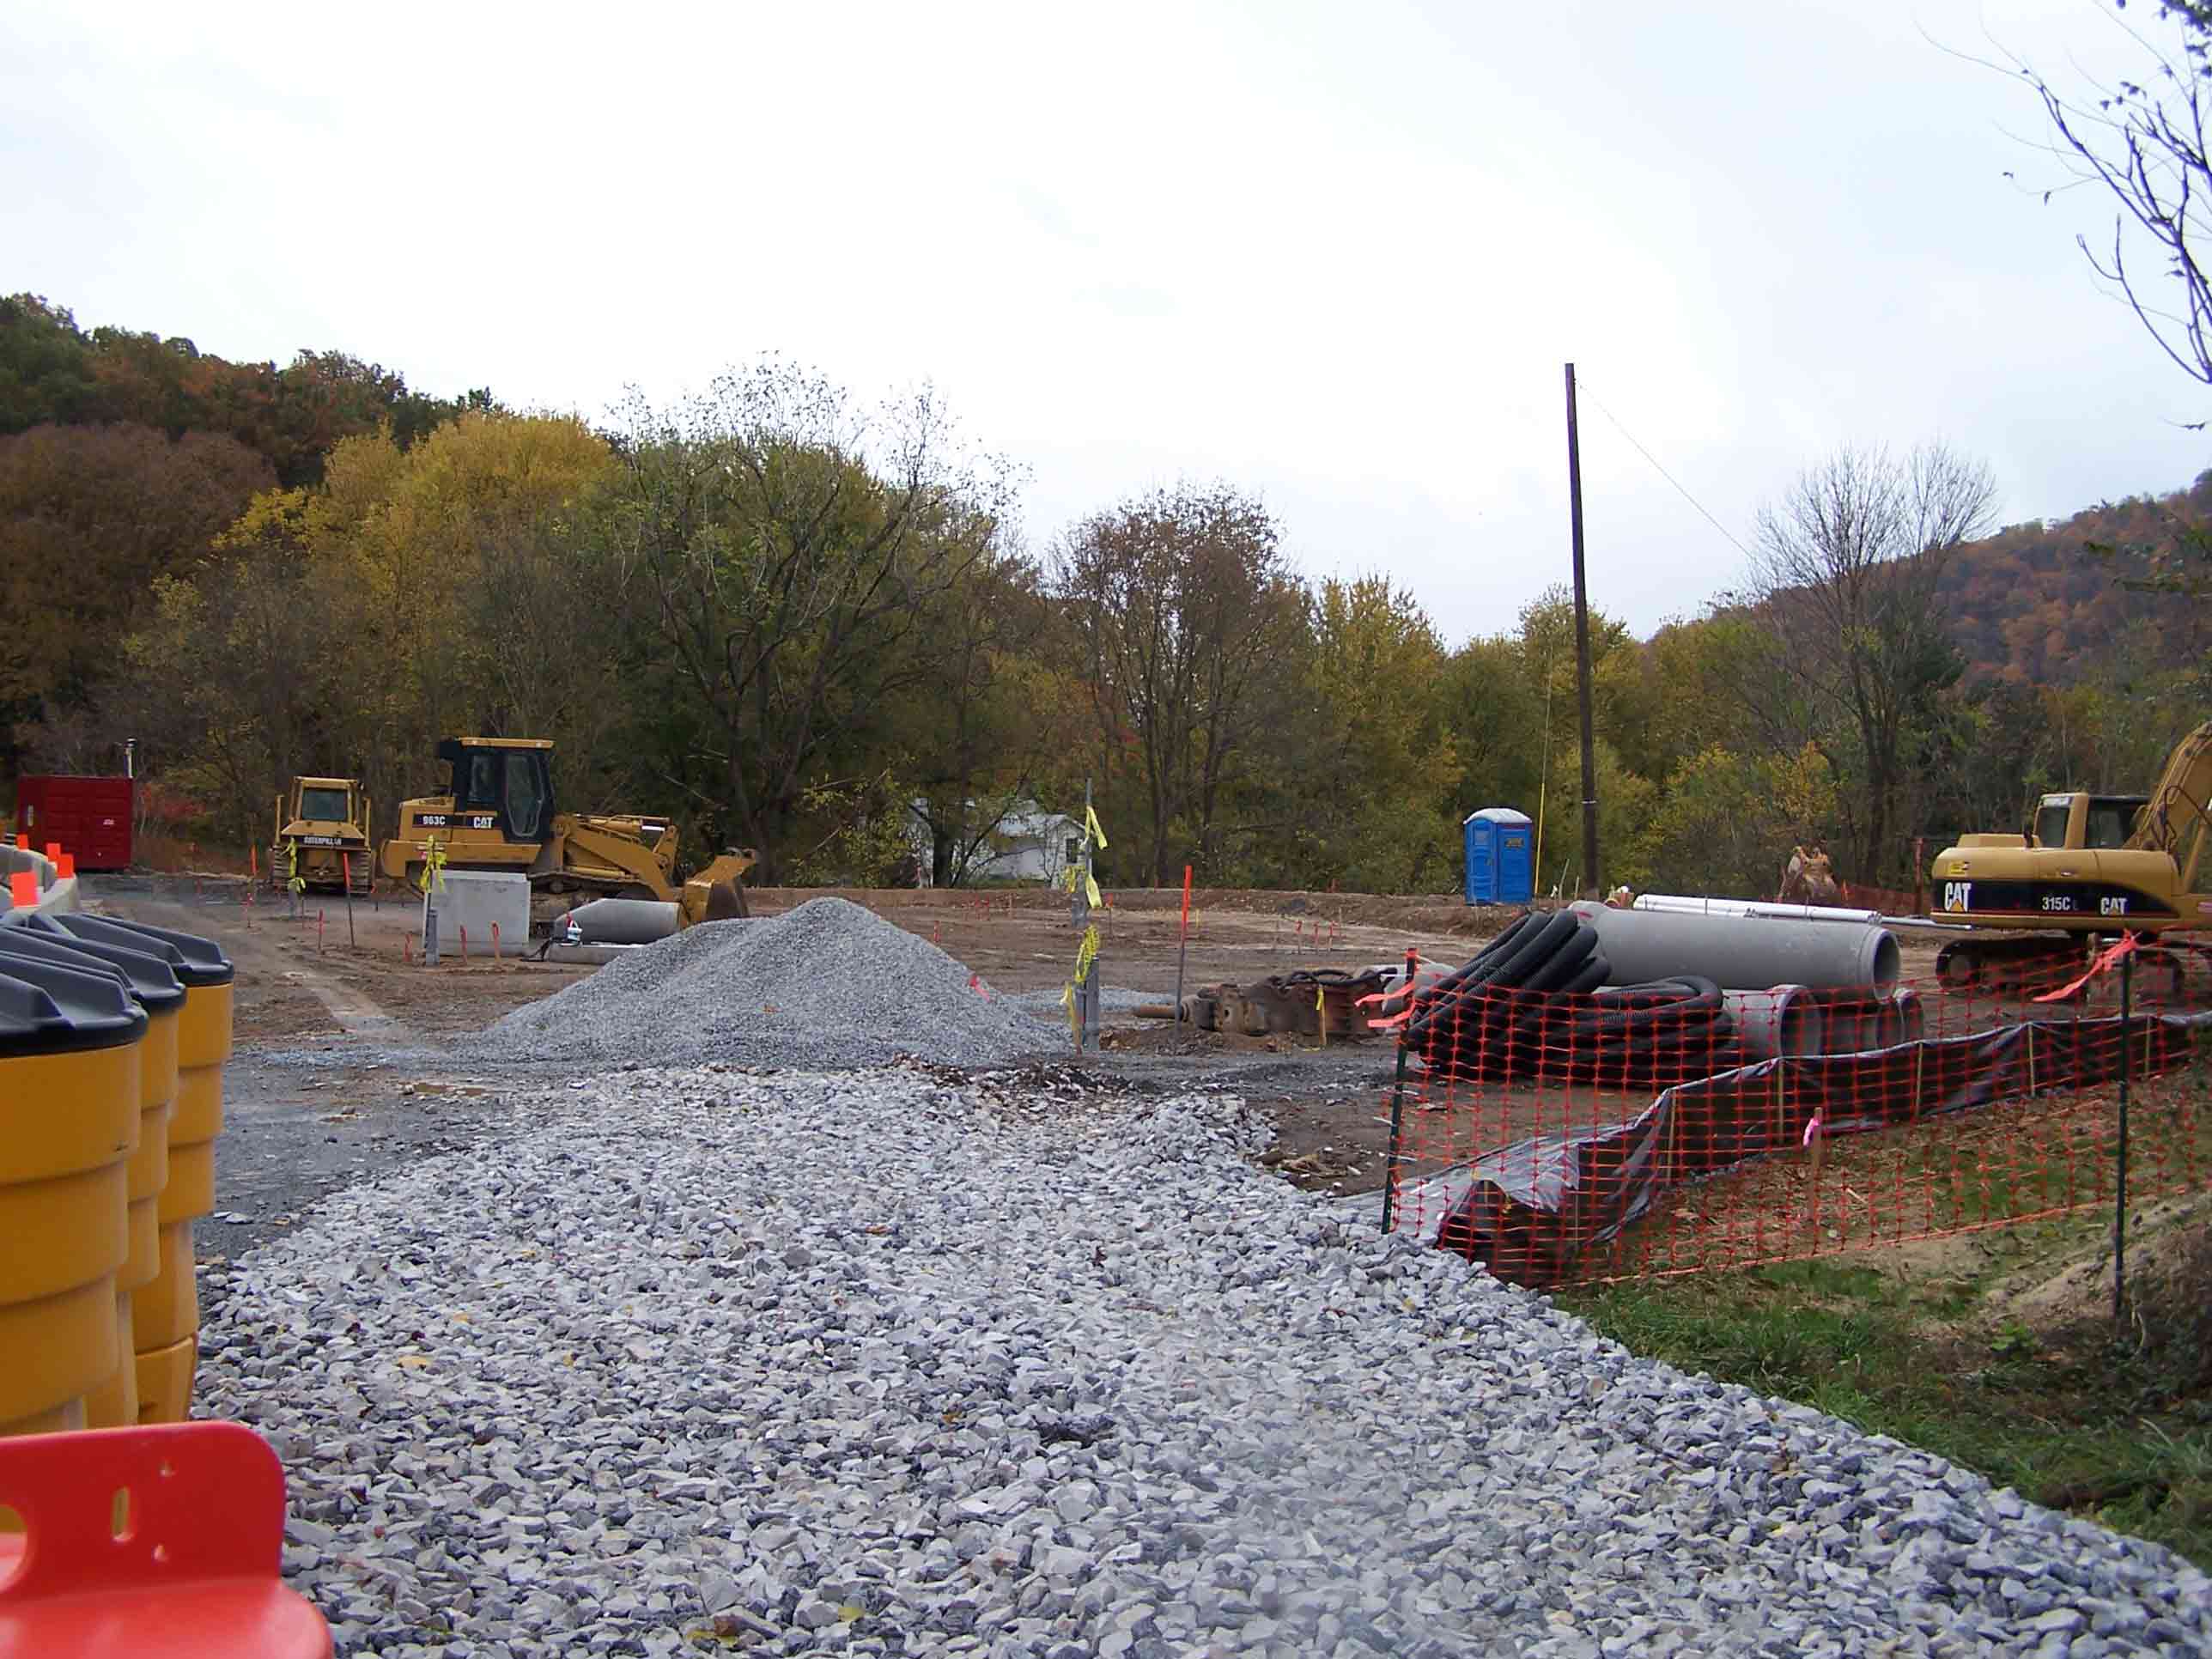 mm 6.7 - Construction at Weverton Road (Possible new parking lot?). Courtesy at@rohland.org